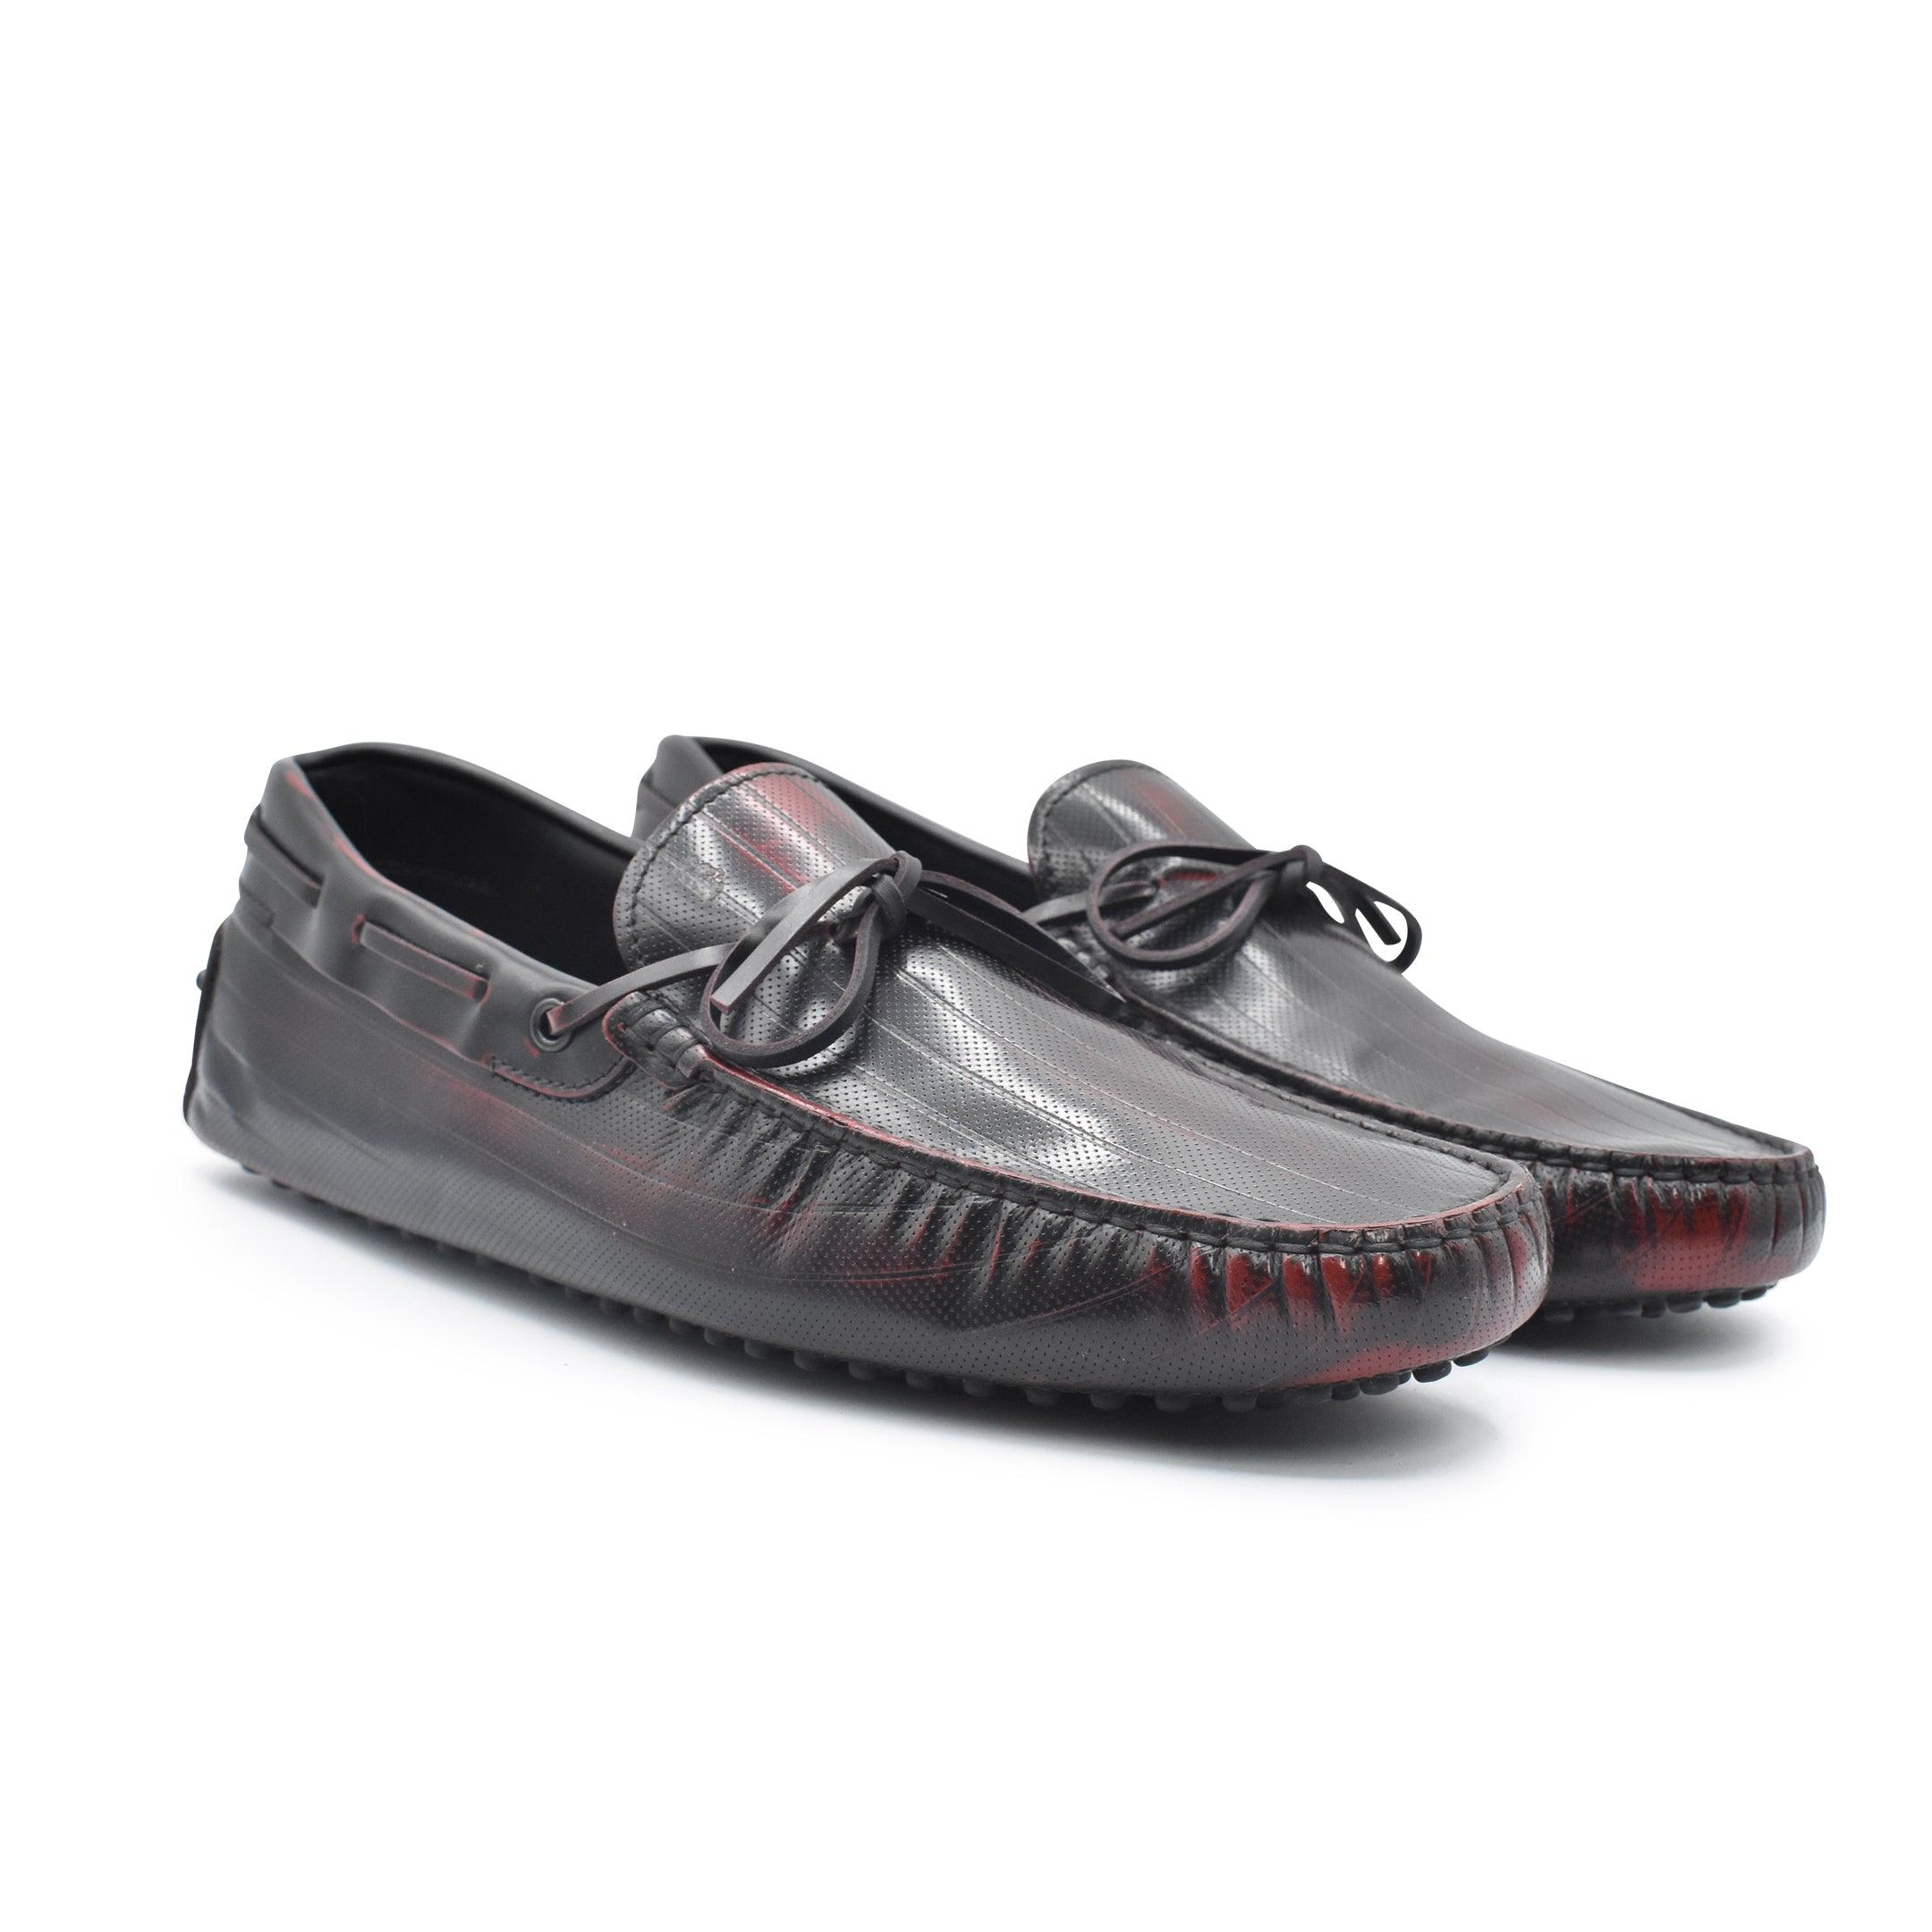 Tod's Loafers - Men's 9.5UK - Fashionably Yours